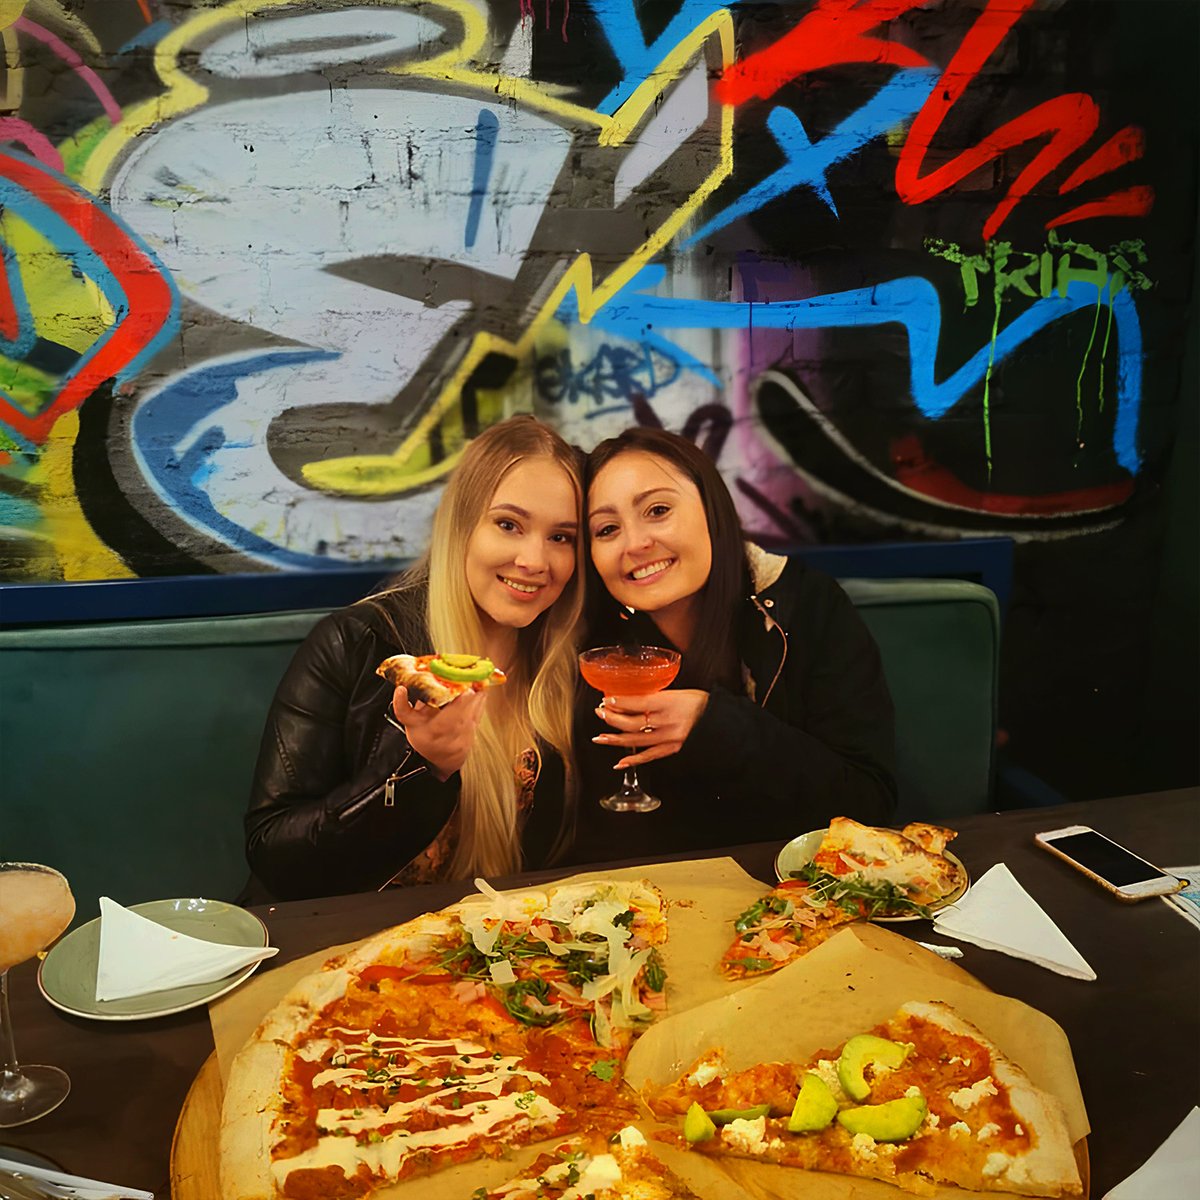 Did somebody say Friday? Start the weekend off the right way, with Smack Pizza! 🍕🍸

#smackmaxxing #Smack #lowingluten #highqualityingredients #pizzalover #stonemilledflour #AuthenticNewYork #Bestcrust #Secretisinthecrust